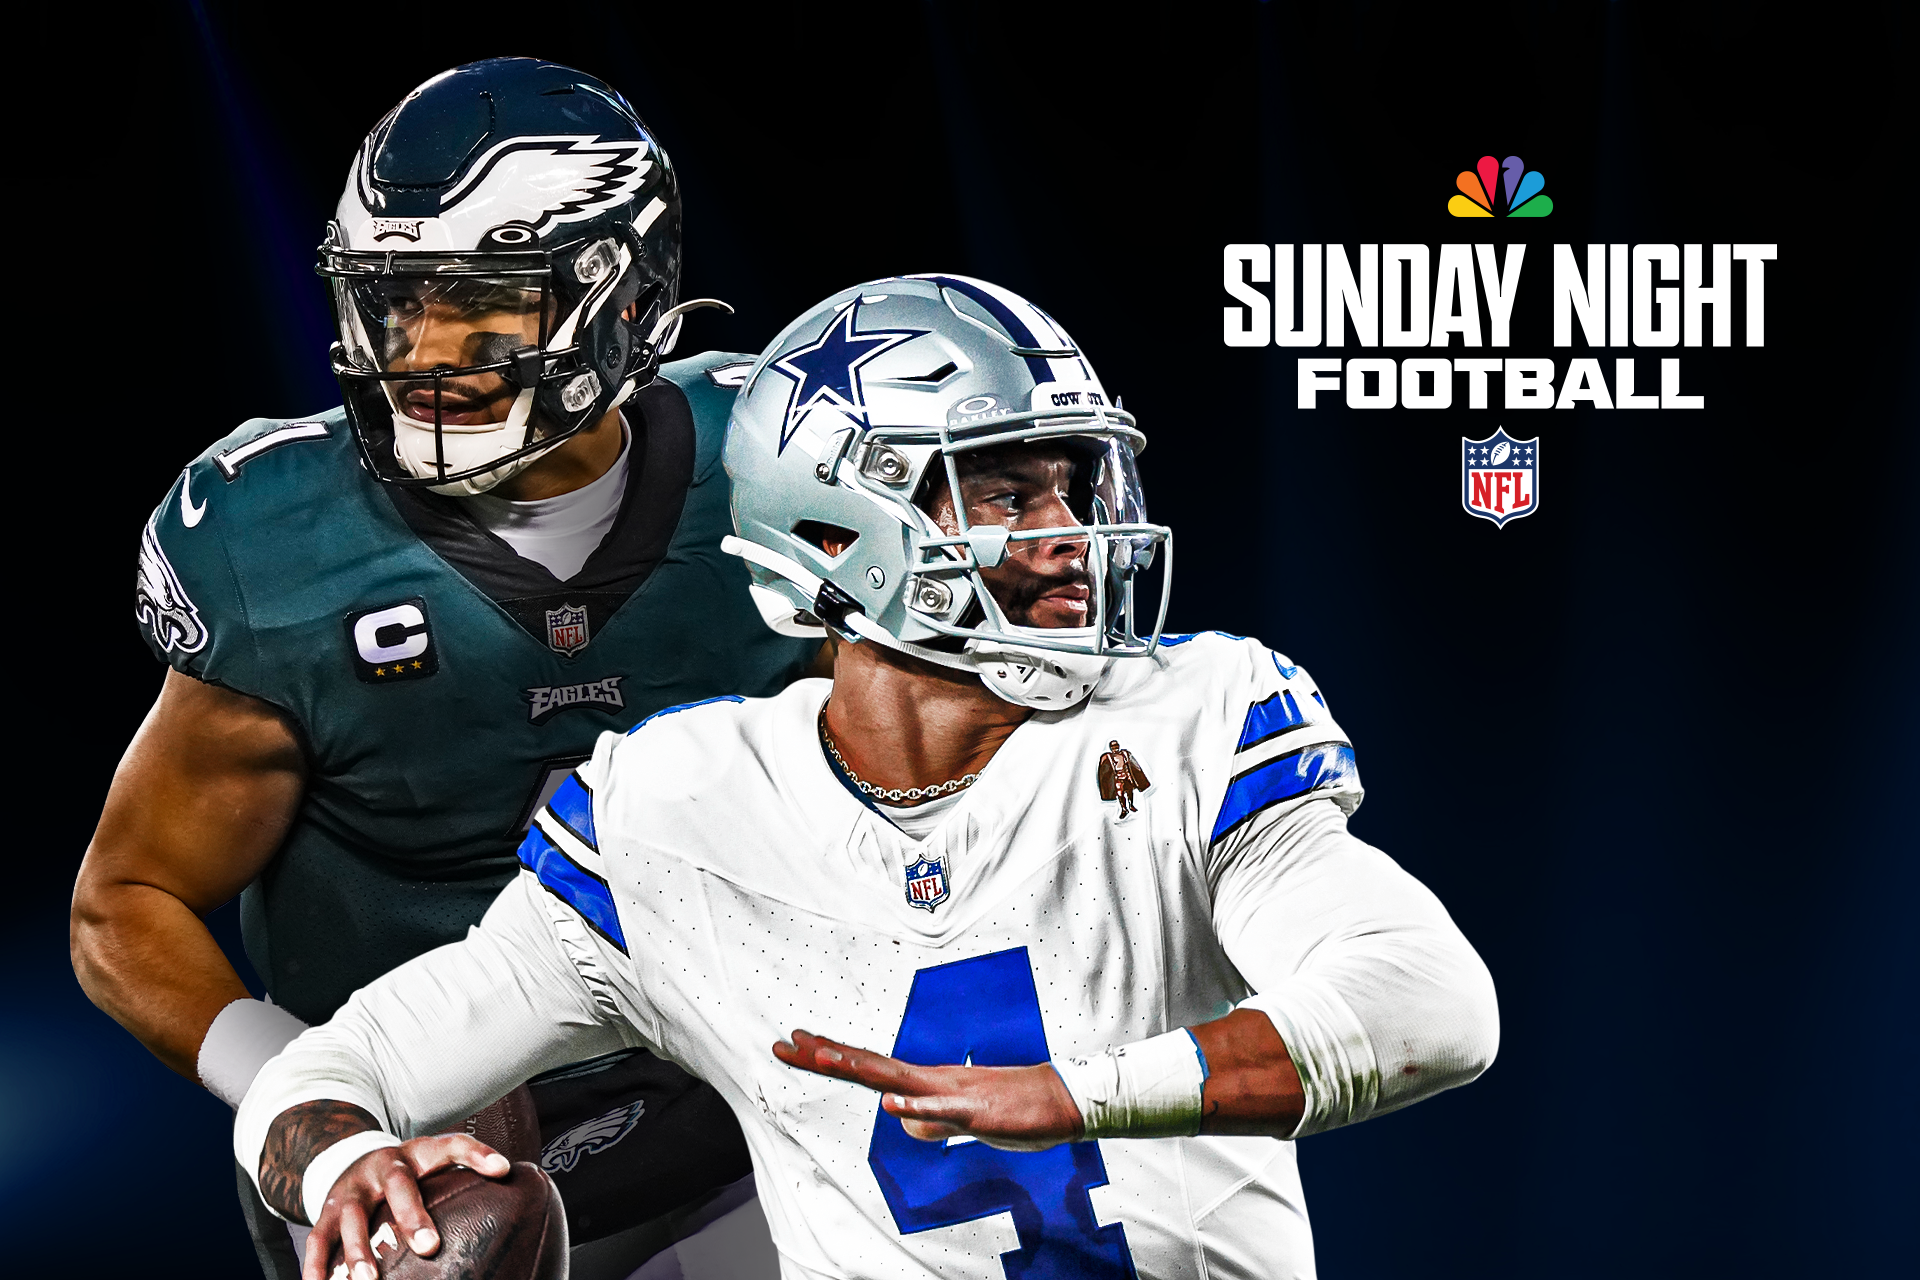 Eagles-Cowboys: Start time, channel, how to watch and stream